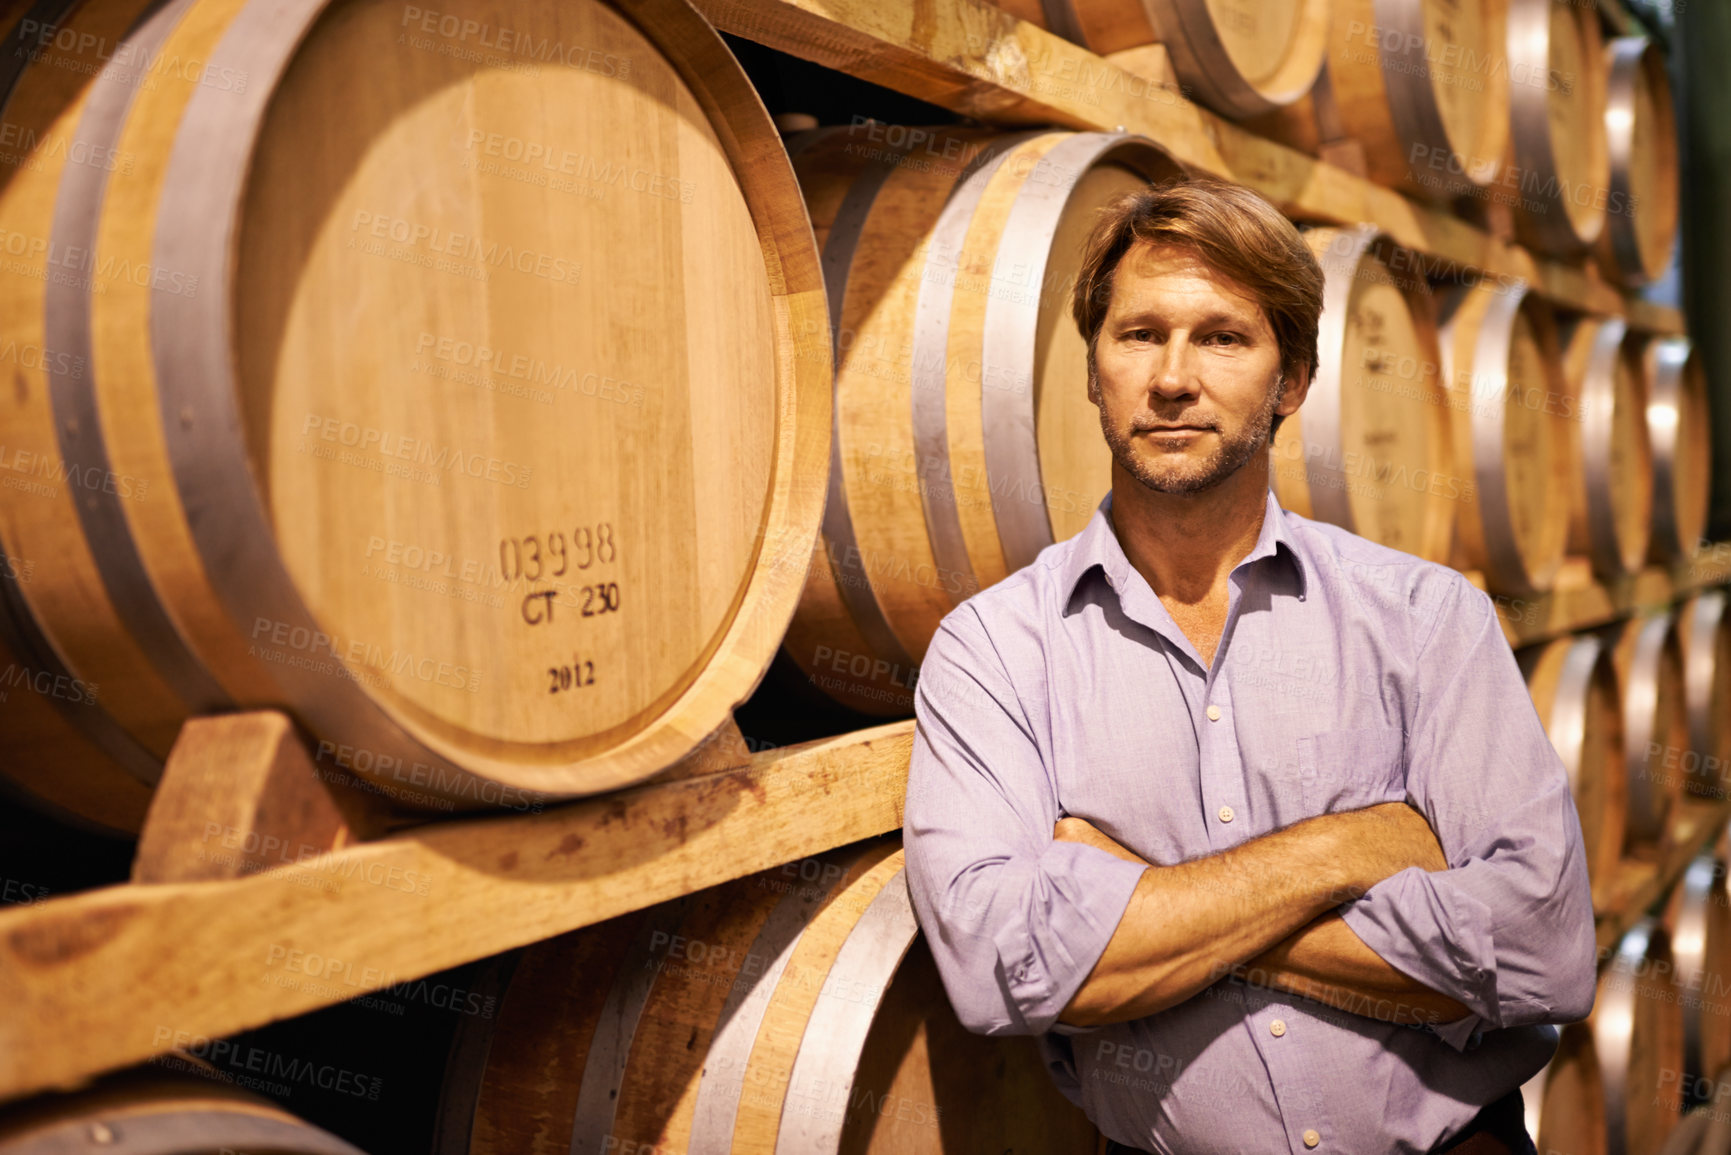 Buy stock photo Shot of a handsome mature man standing in a wine cellar